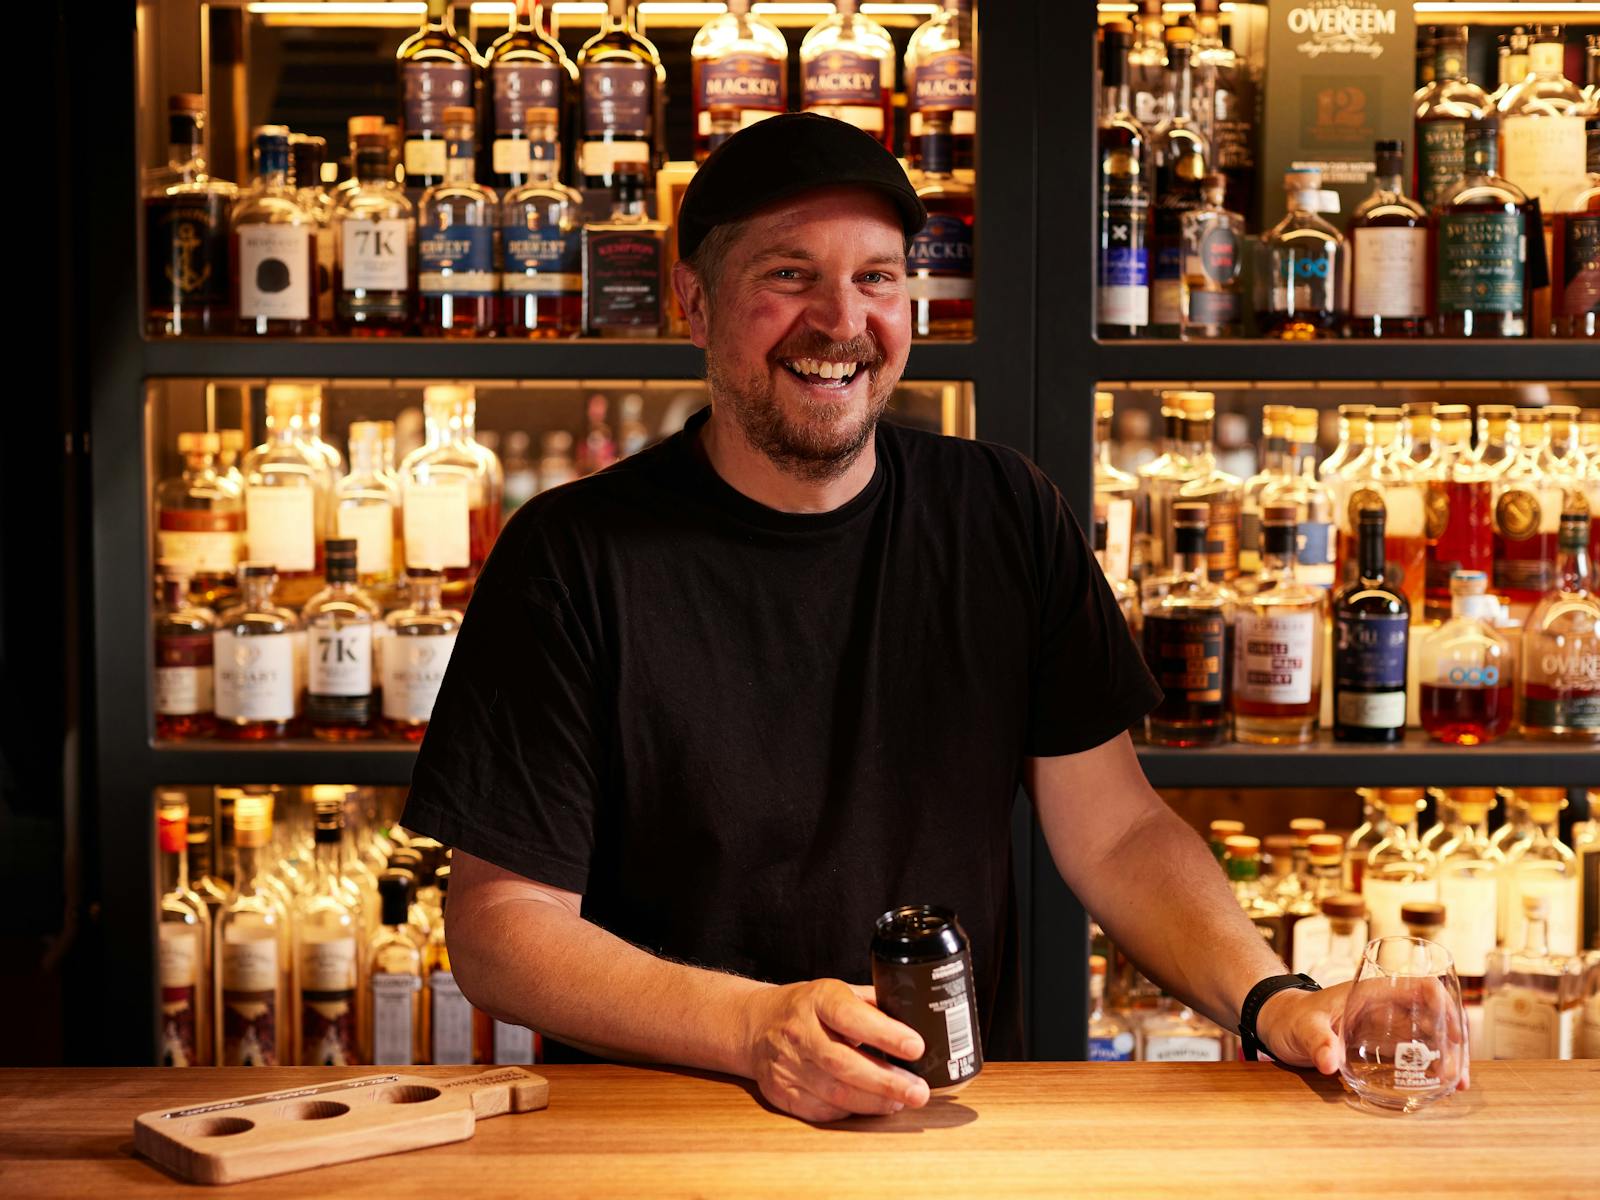 Smiling staff member about to pour a drink with shelves of delicious spirits behind them.